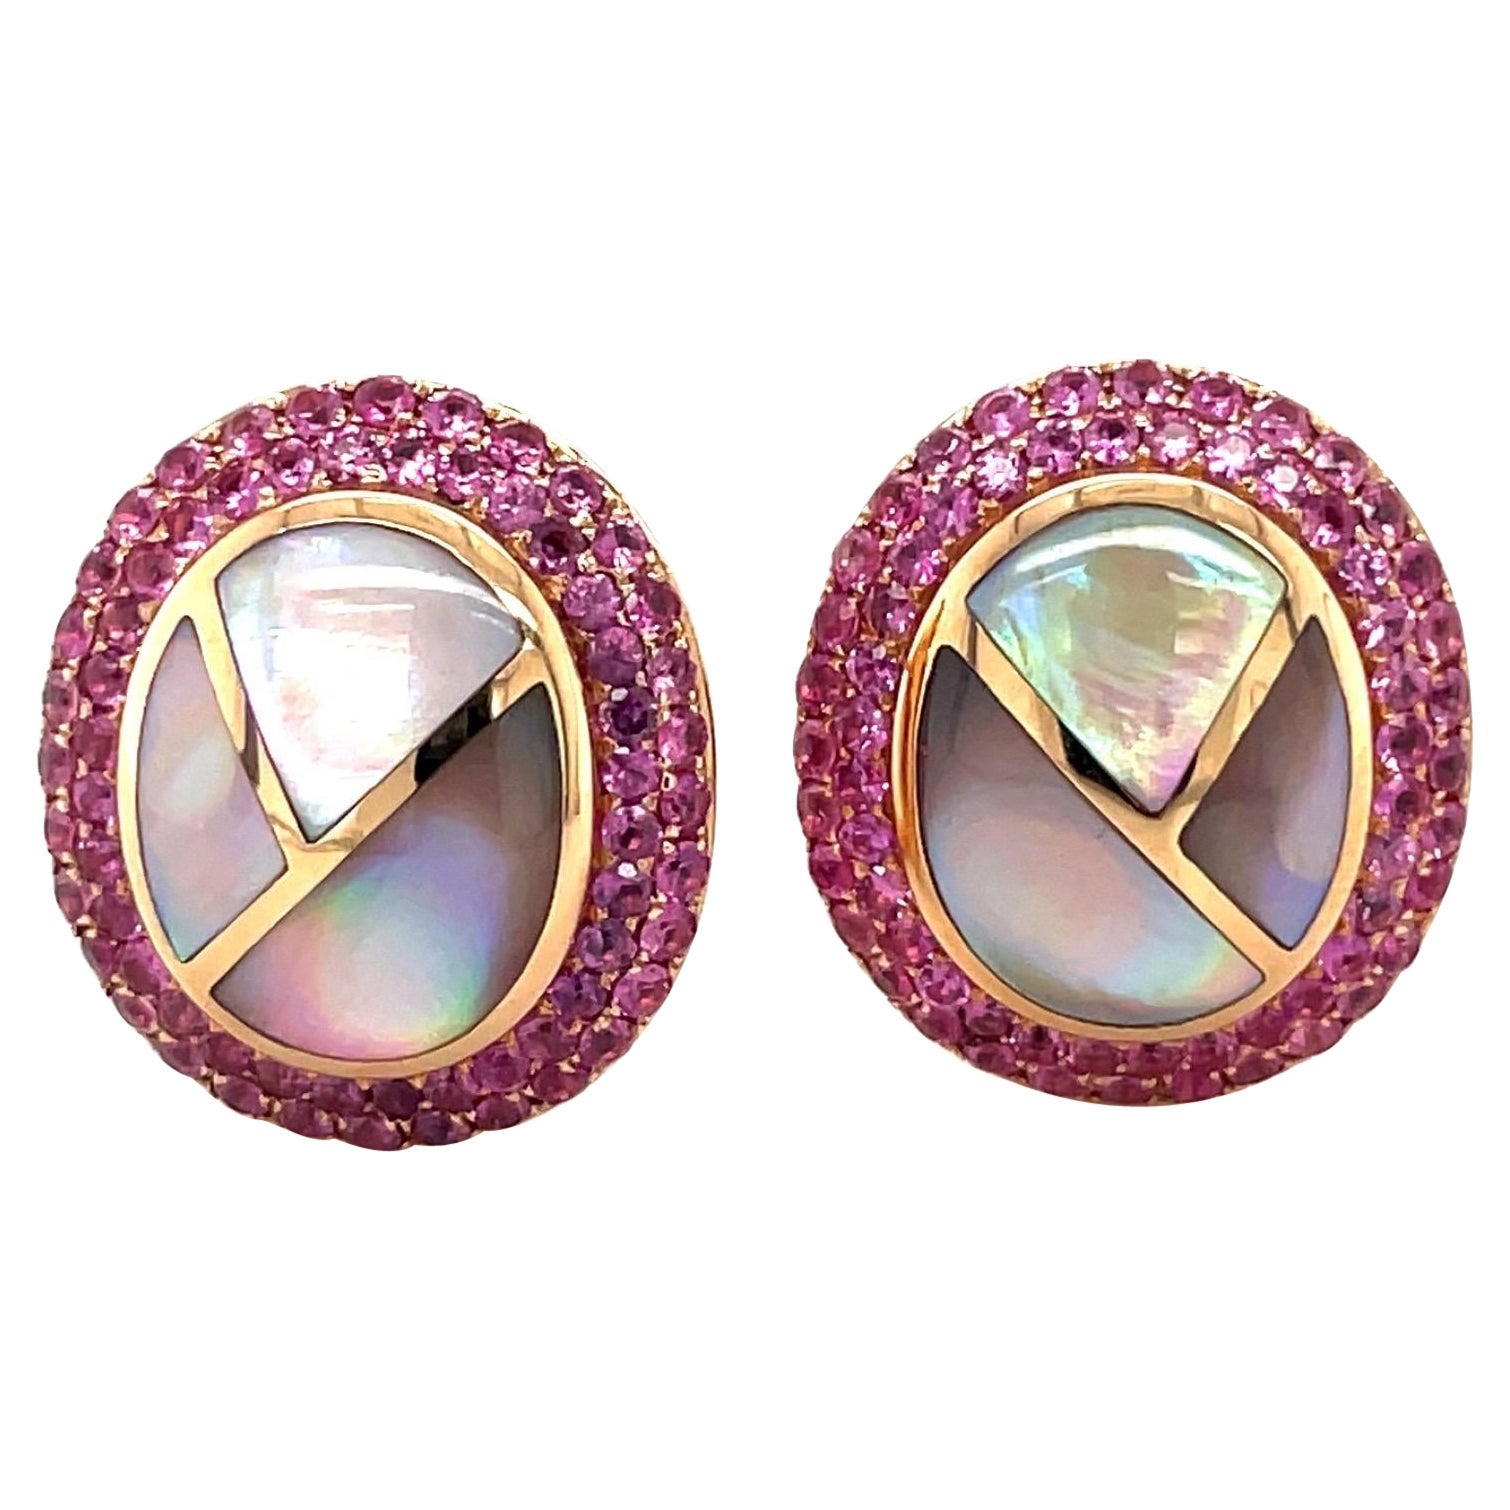 Asch Grossbardt 18KT RG Earrings 1.45CT Pink Sapphire & Pink Mother of Pearl